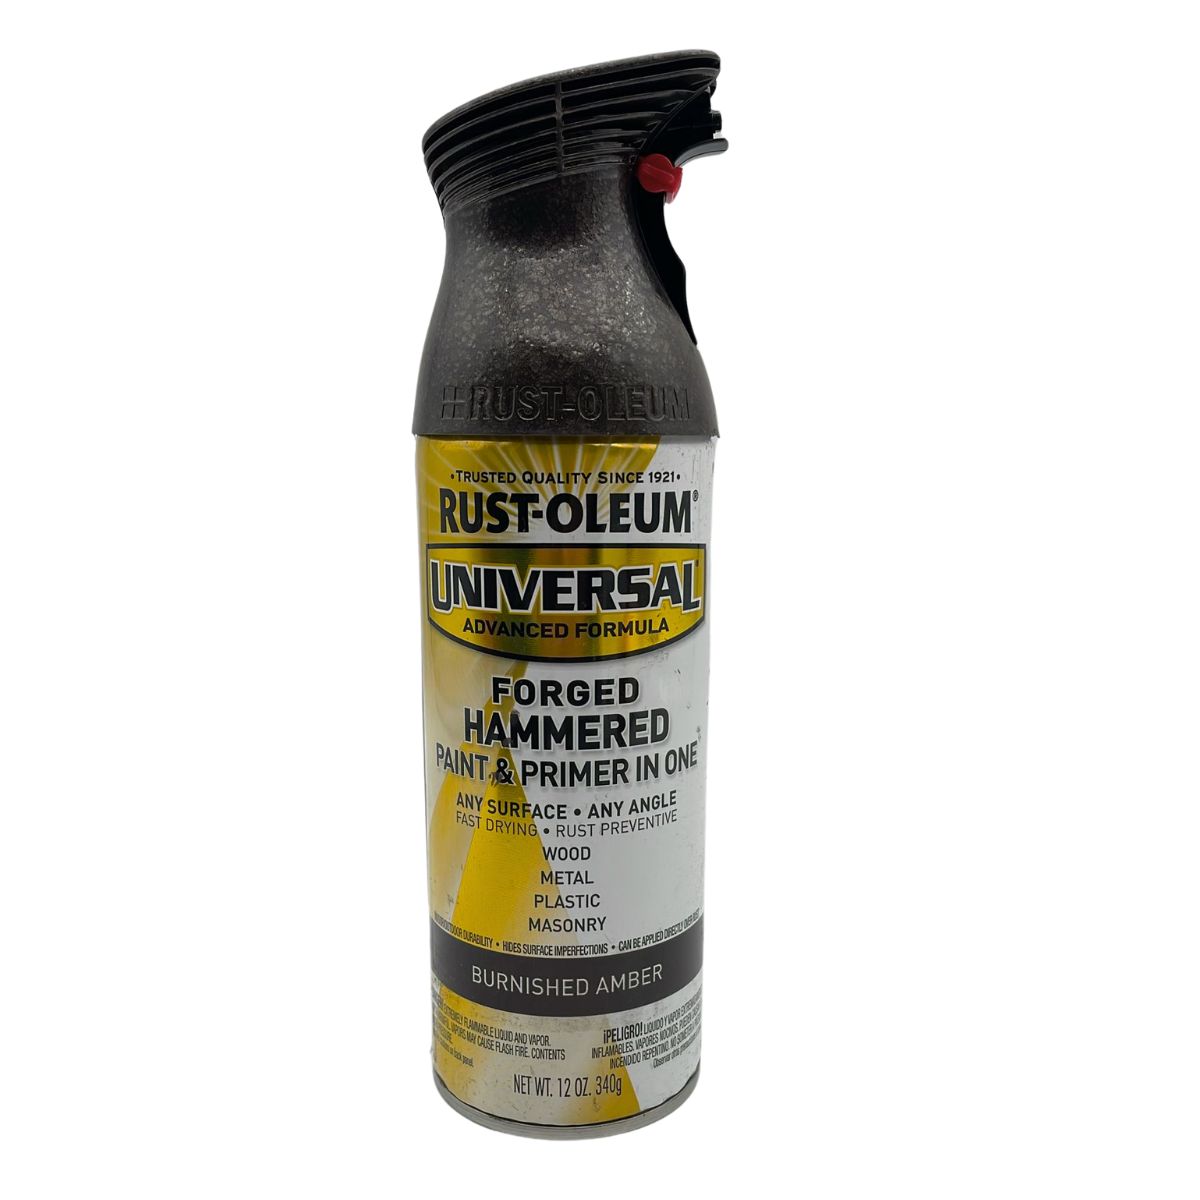 Rust-Oleum Universal Forged Hammered Burnished Amber - 271480 Spraypaint 340g - South East Clearance Centre